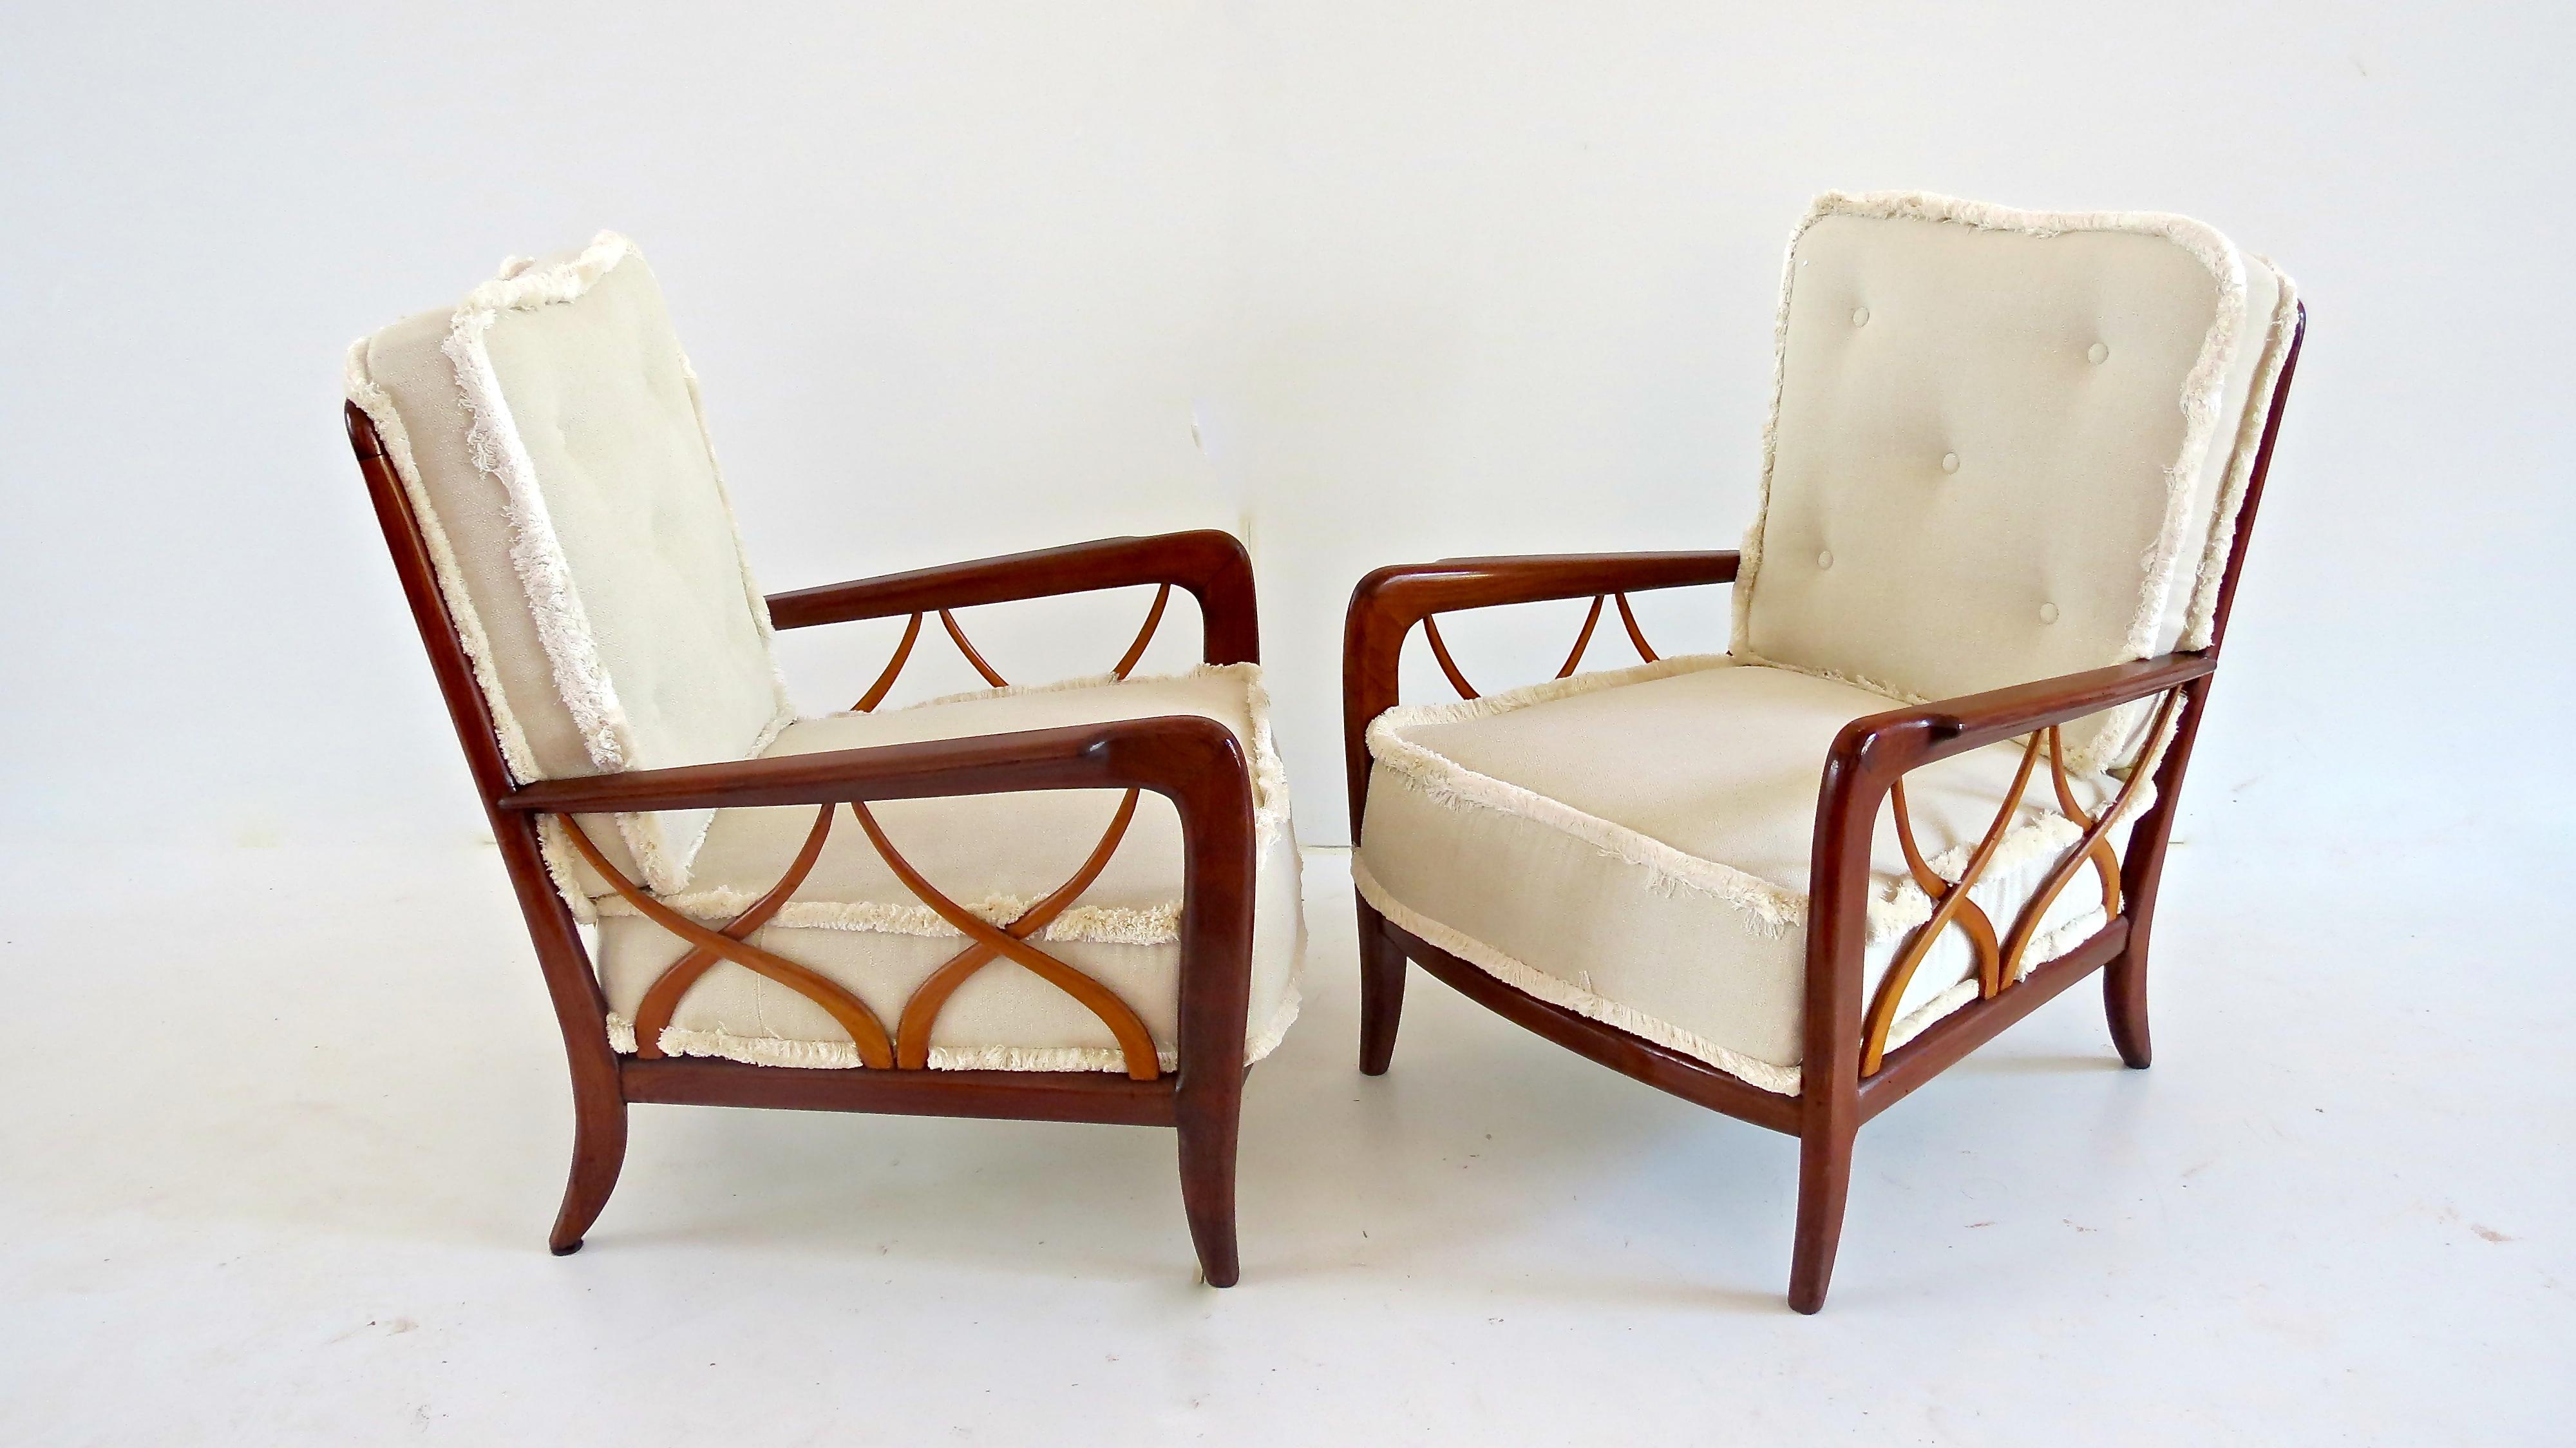 Important elegant pairs of armchairs, attributed by Arch. Paolo Buffa in 1940
Each chair with incurved, rectangular, vertically slatted backrest above moulded, fluted waterfall arms; centring a rhomboid, loosed back cushion above a conforming seat